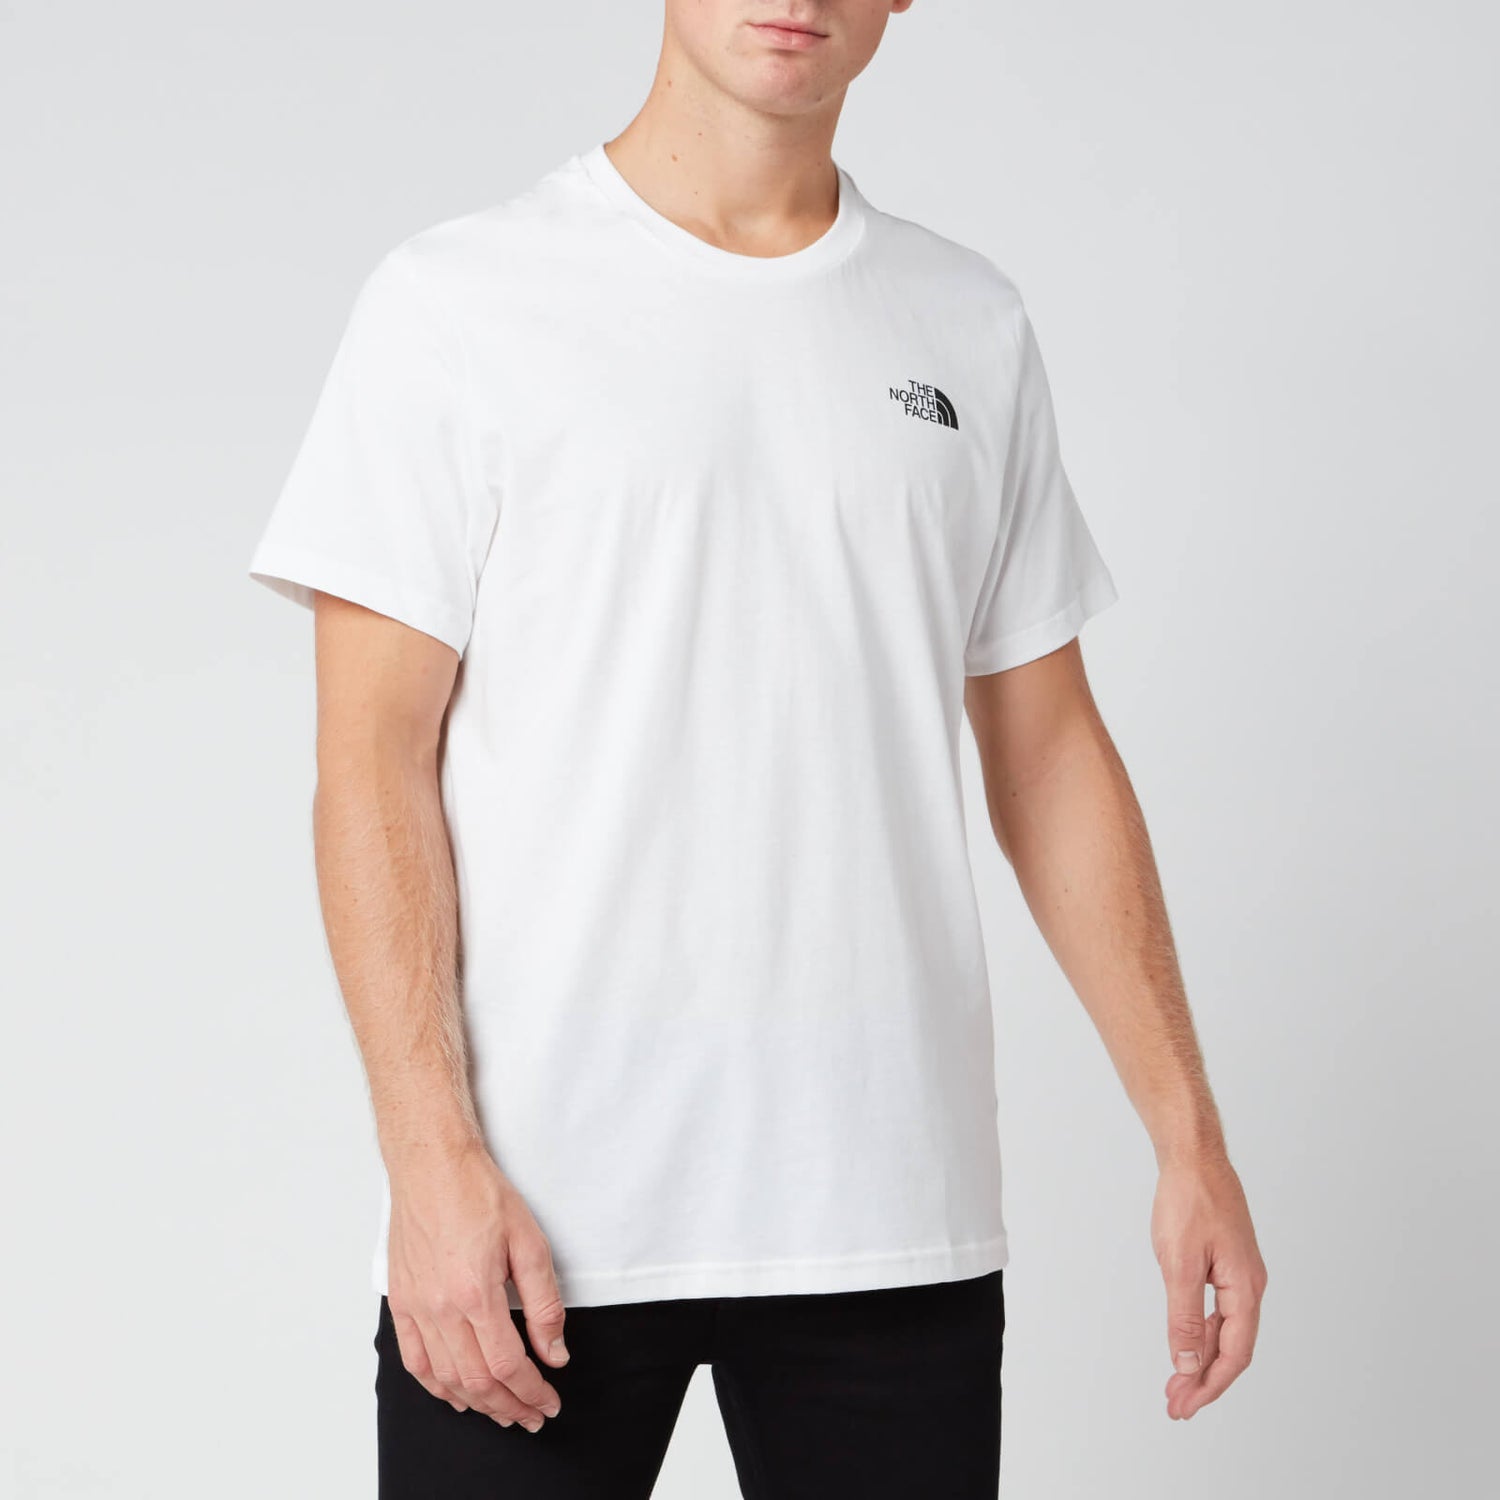 The North Face Men's Simple Dome Short Sleeve T-Shirt - TNF White - S